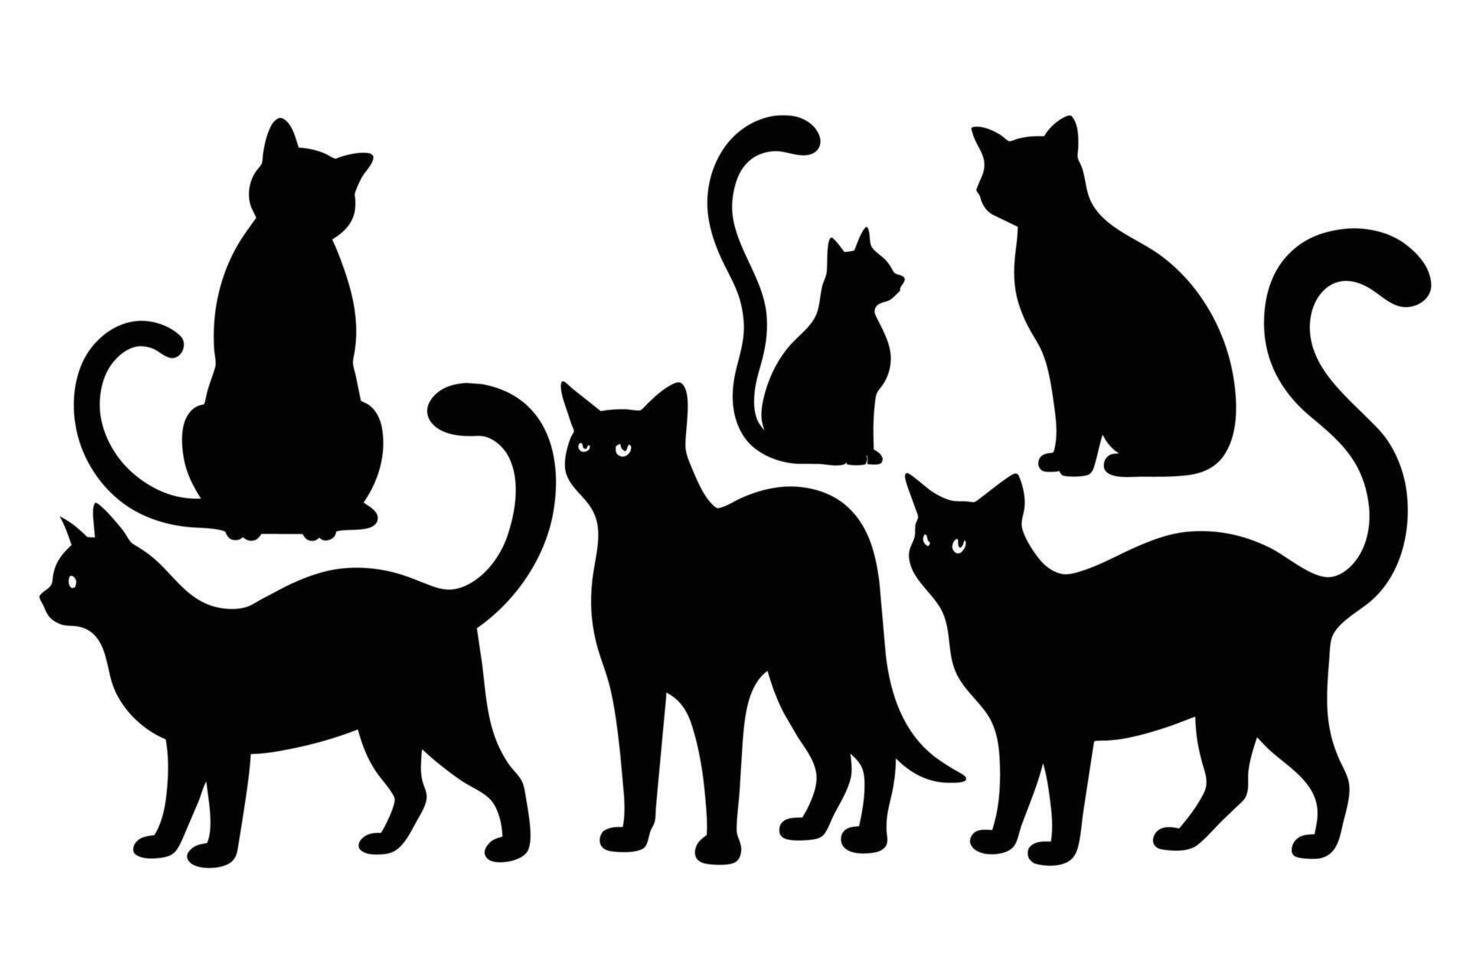 Cat silhouettes collection isolated on white background vector